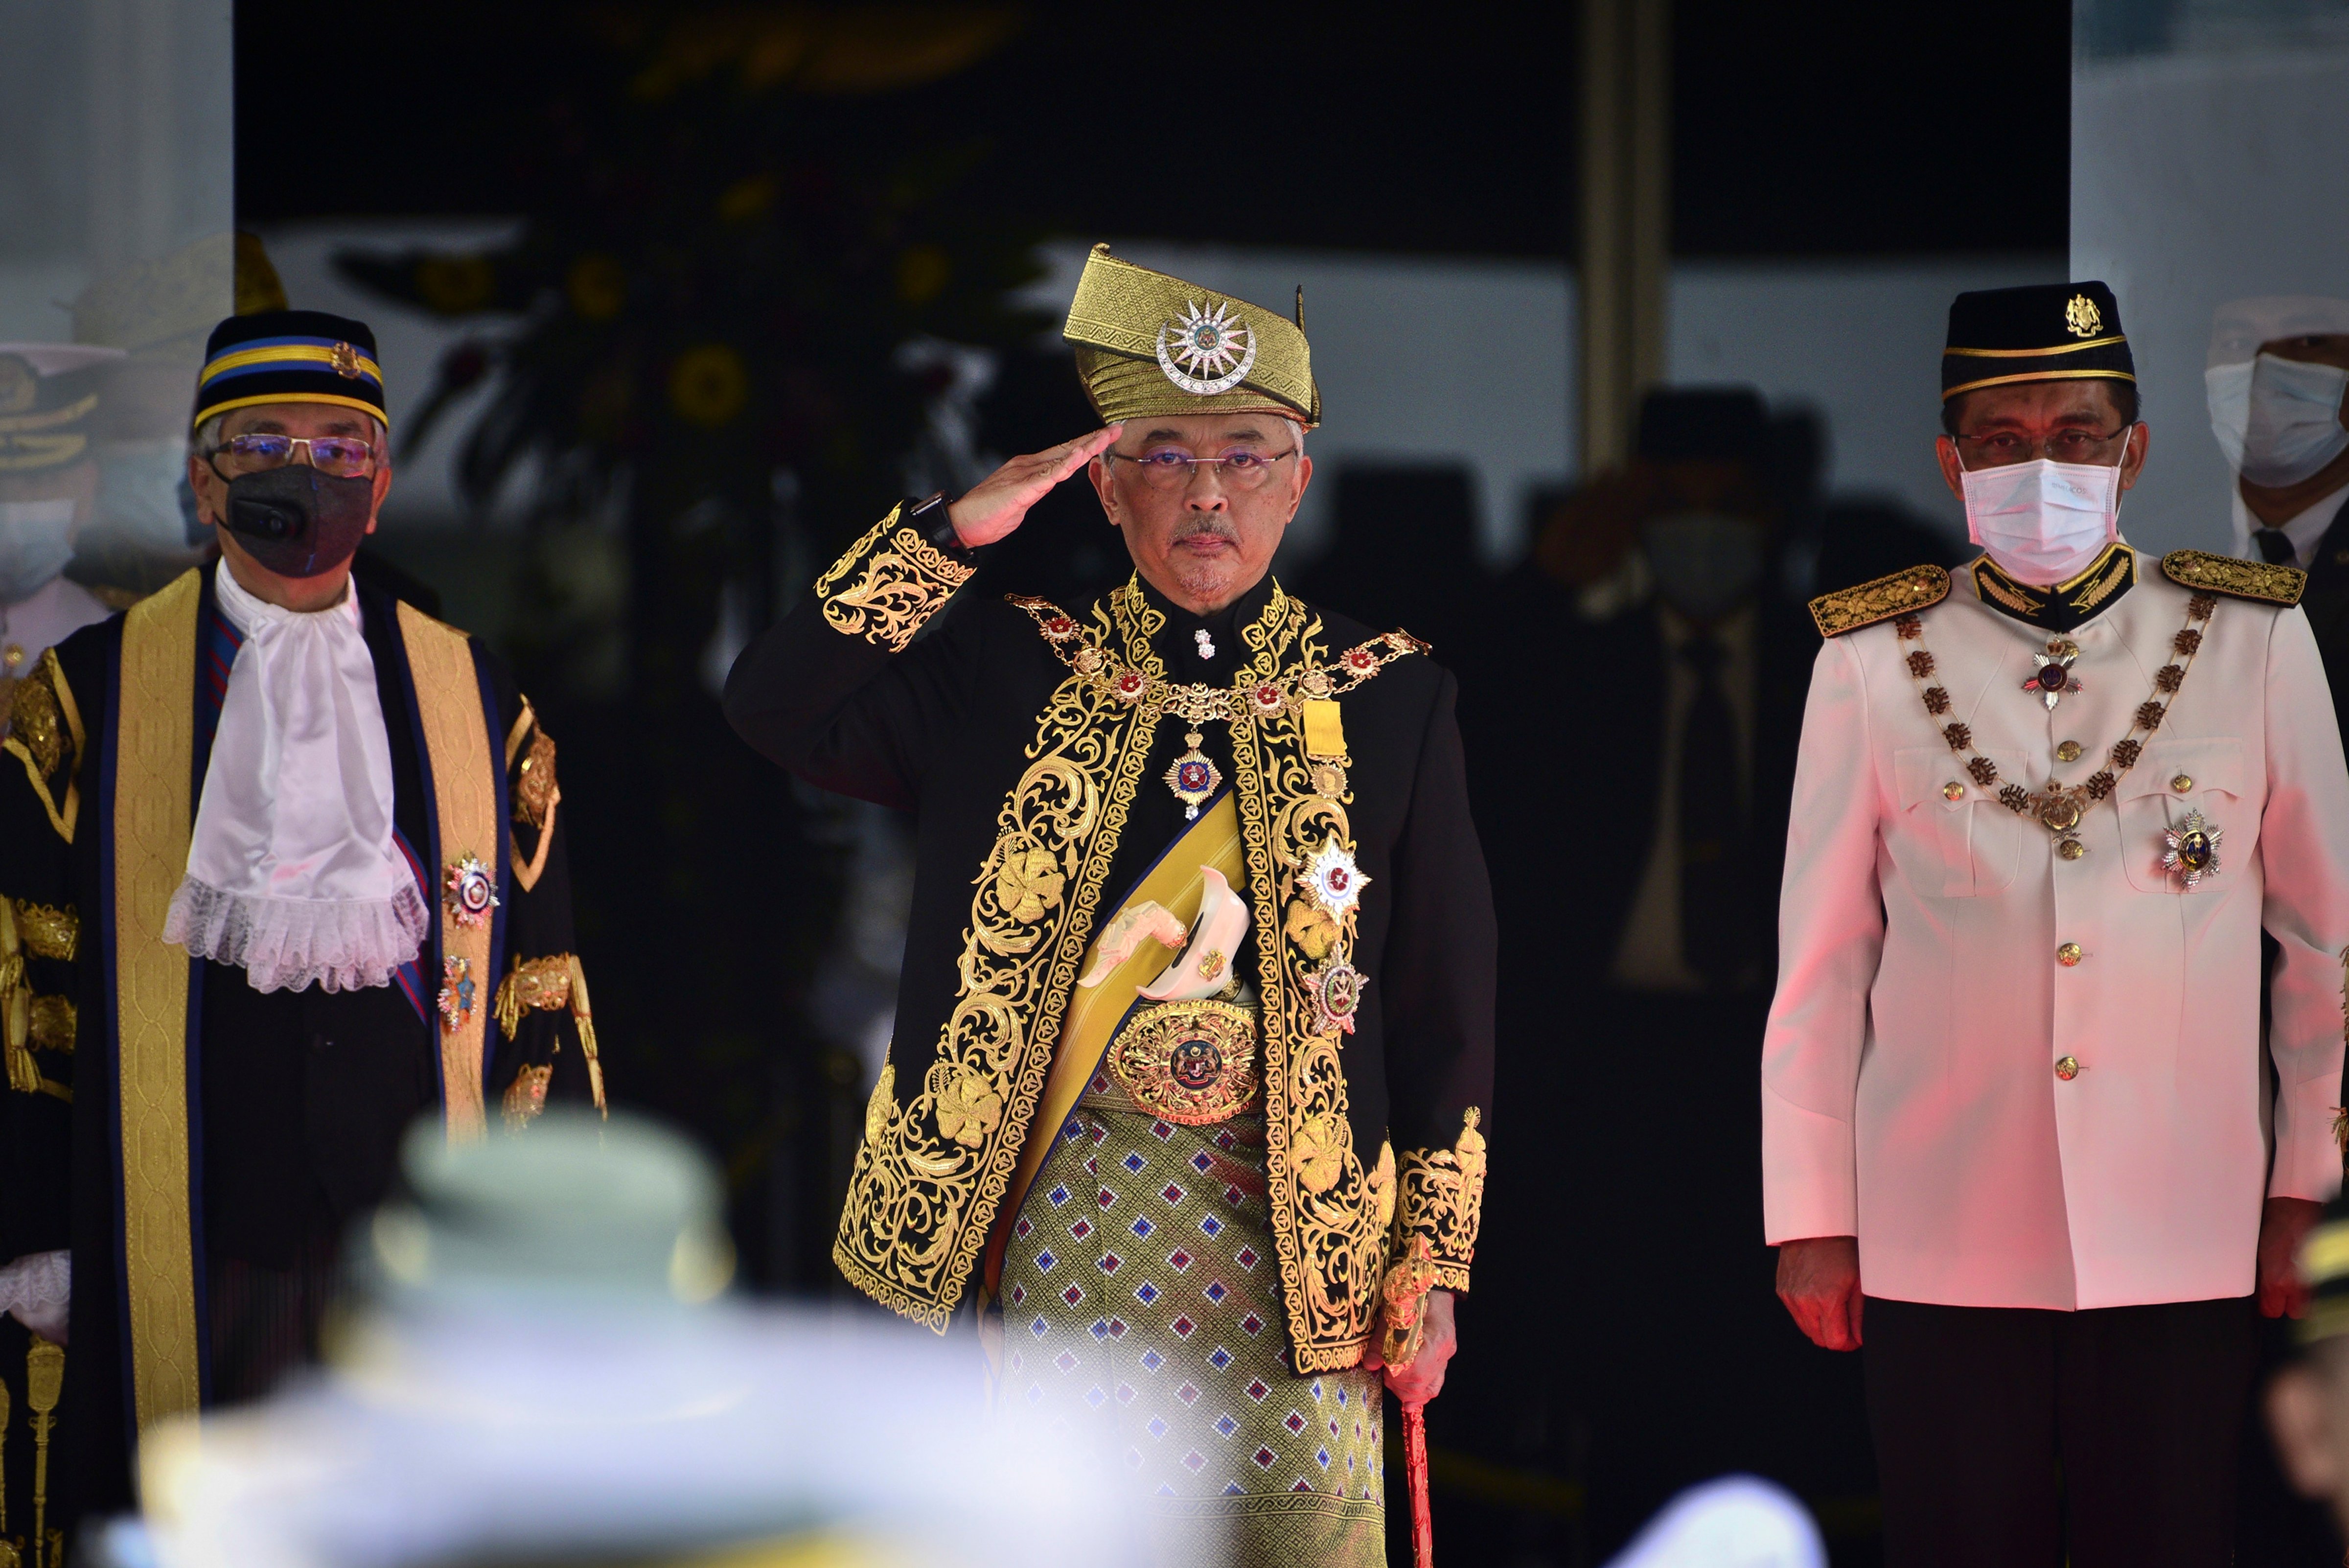 Malaysia's King Sultan Abdullah Sultan Ahmad Shah, center, salutes during the opening ceremony of the parliamentary session in Kuala Lumpur, May 18, 2020. (Shaiful Nizal Ismail—Malaysia's Department of Information/AP)